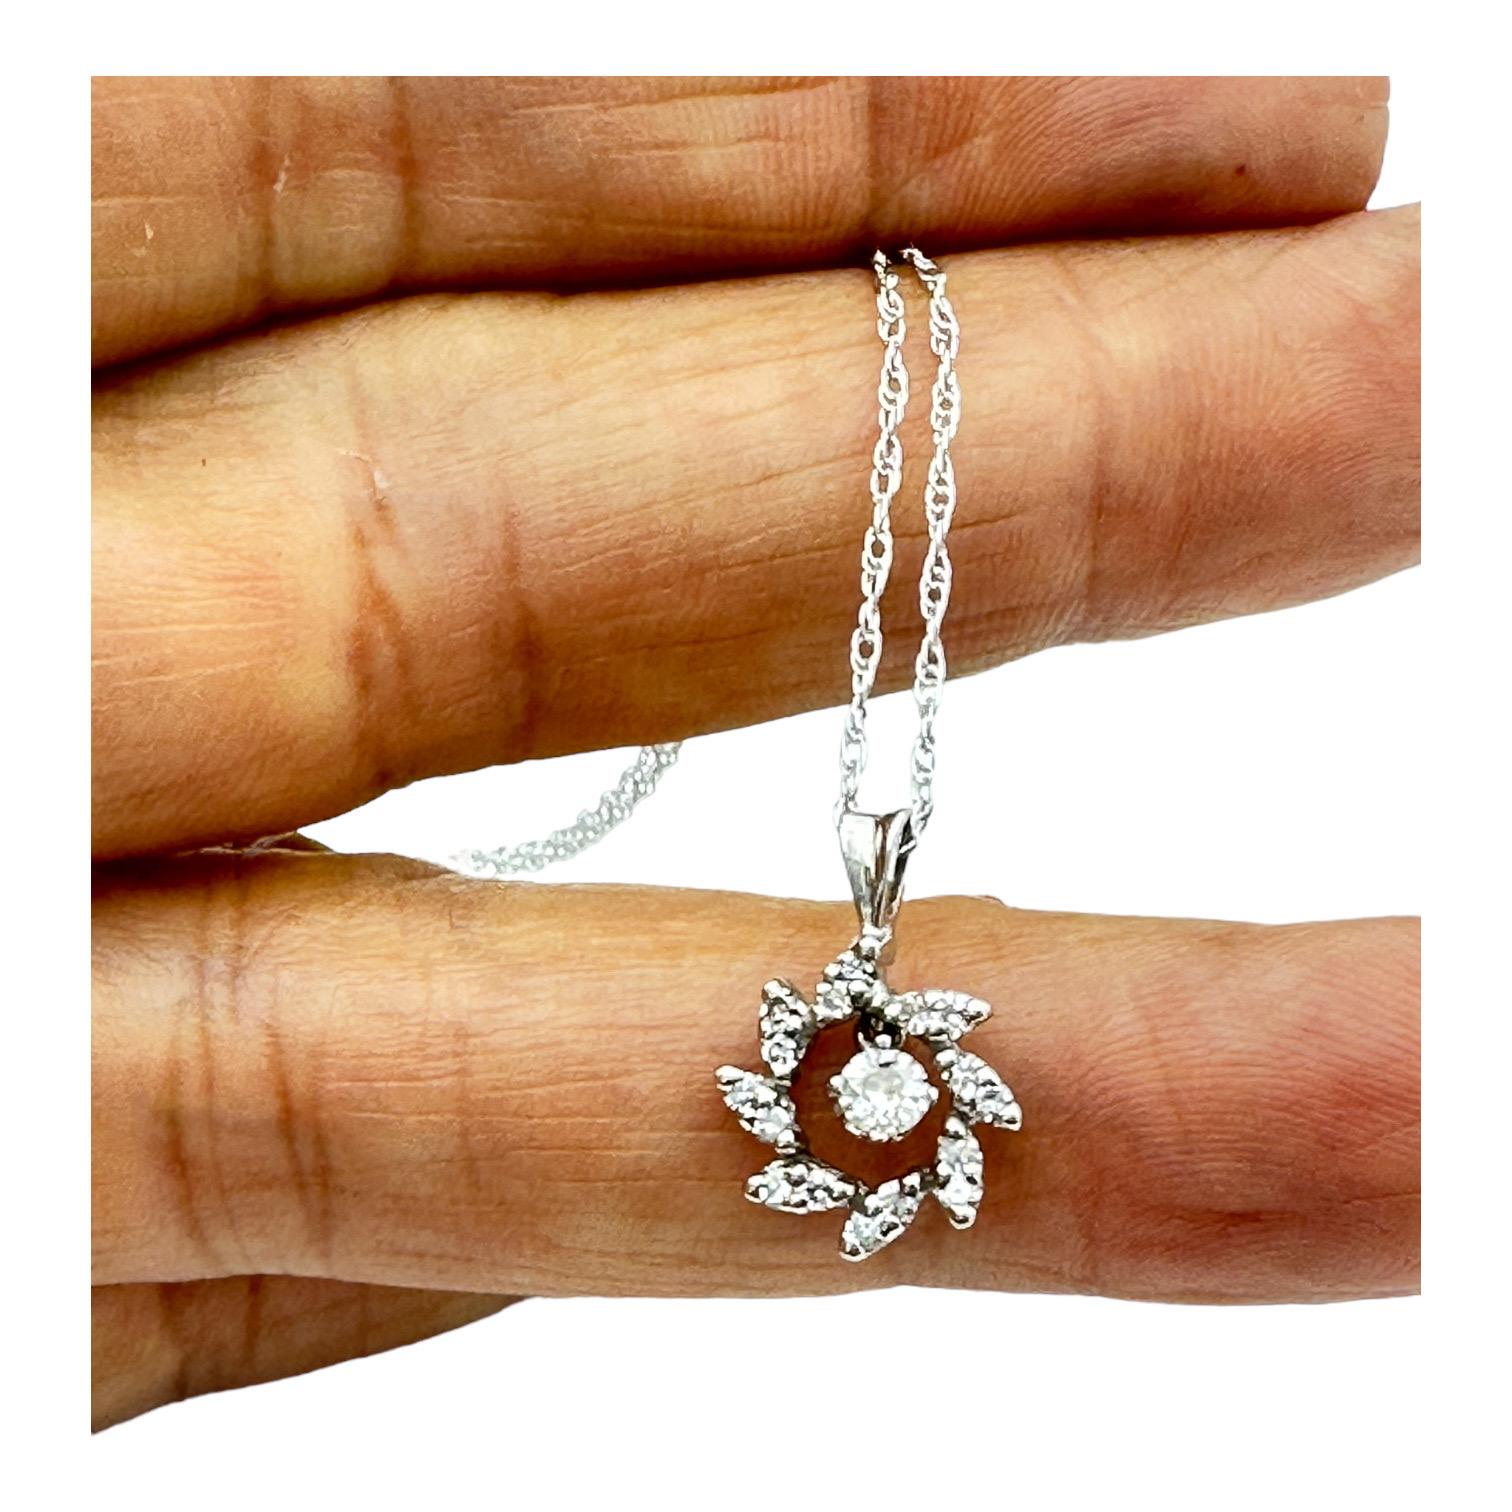 This 14K 1970's Halo Diamond Sweet Pendant is the perfect choice for any jewelry collection. It features a timeless diamond halo design for a sleek and classic look. Crafted with premium 14K gold, it is sure to become a cherished family